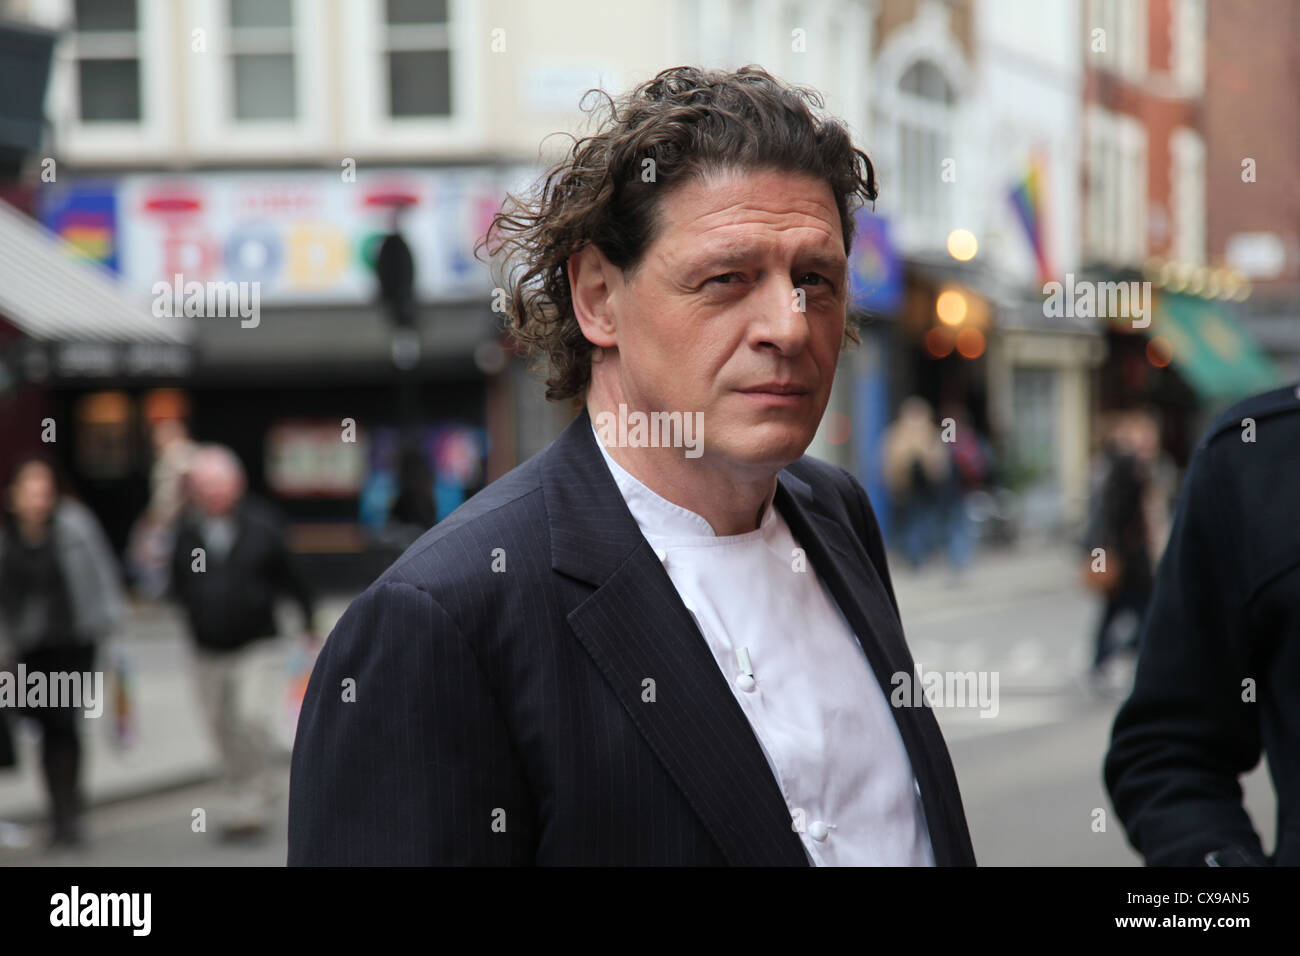 Celebrity Chef and Restauranteur Marco Pierre White takes a break from filming in Soho London. Stock Photo